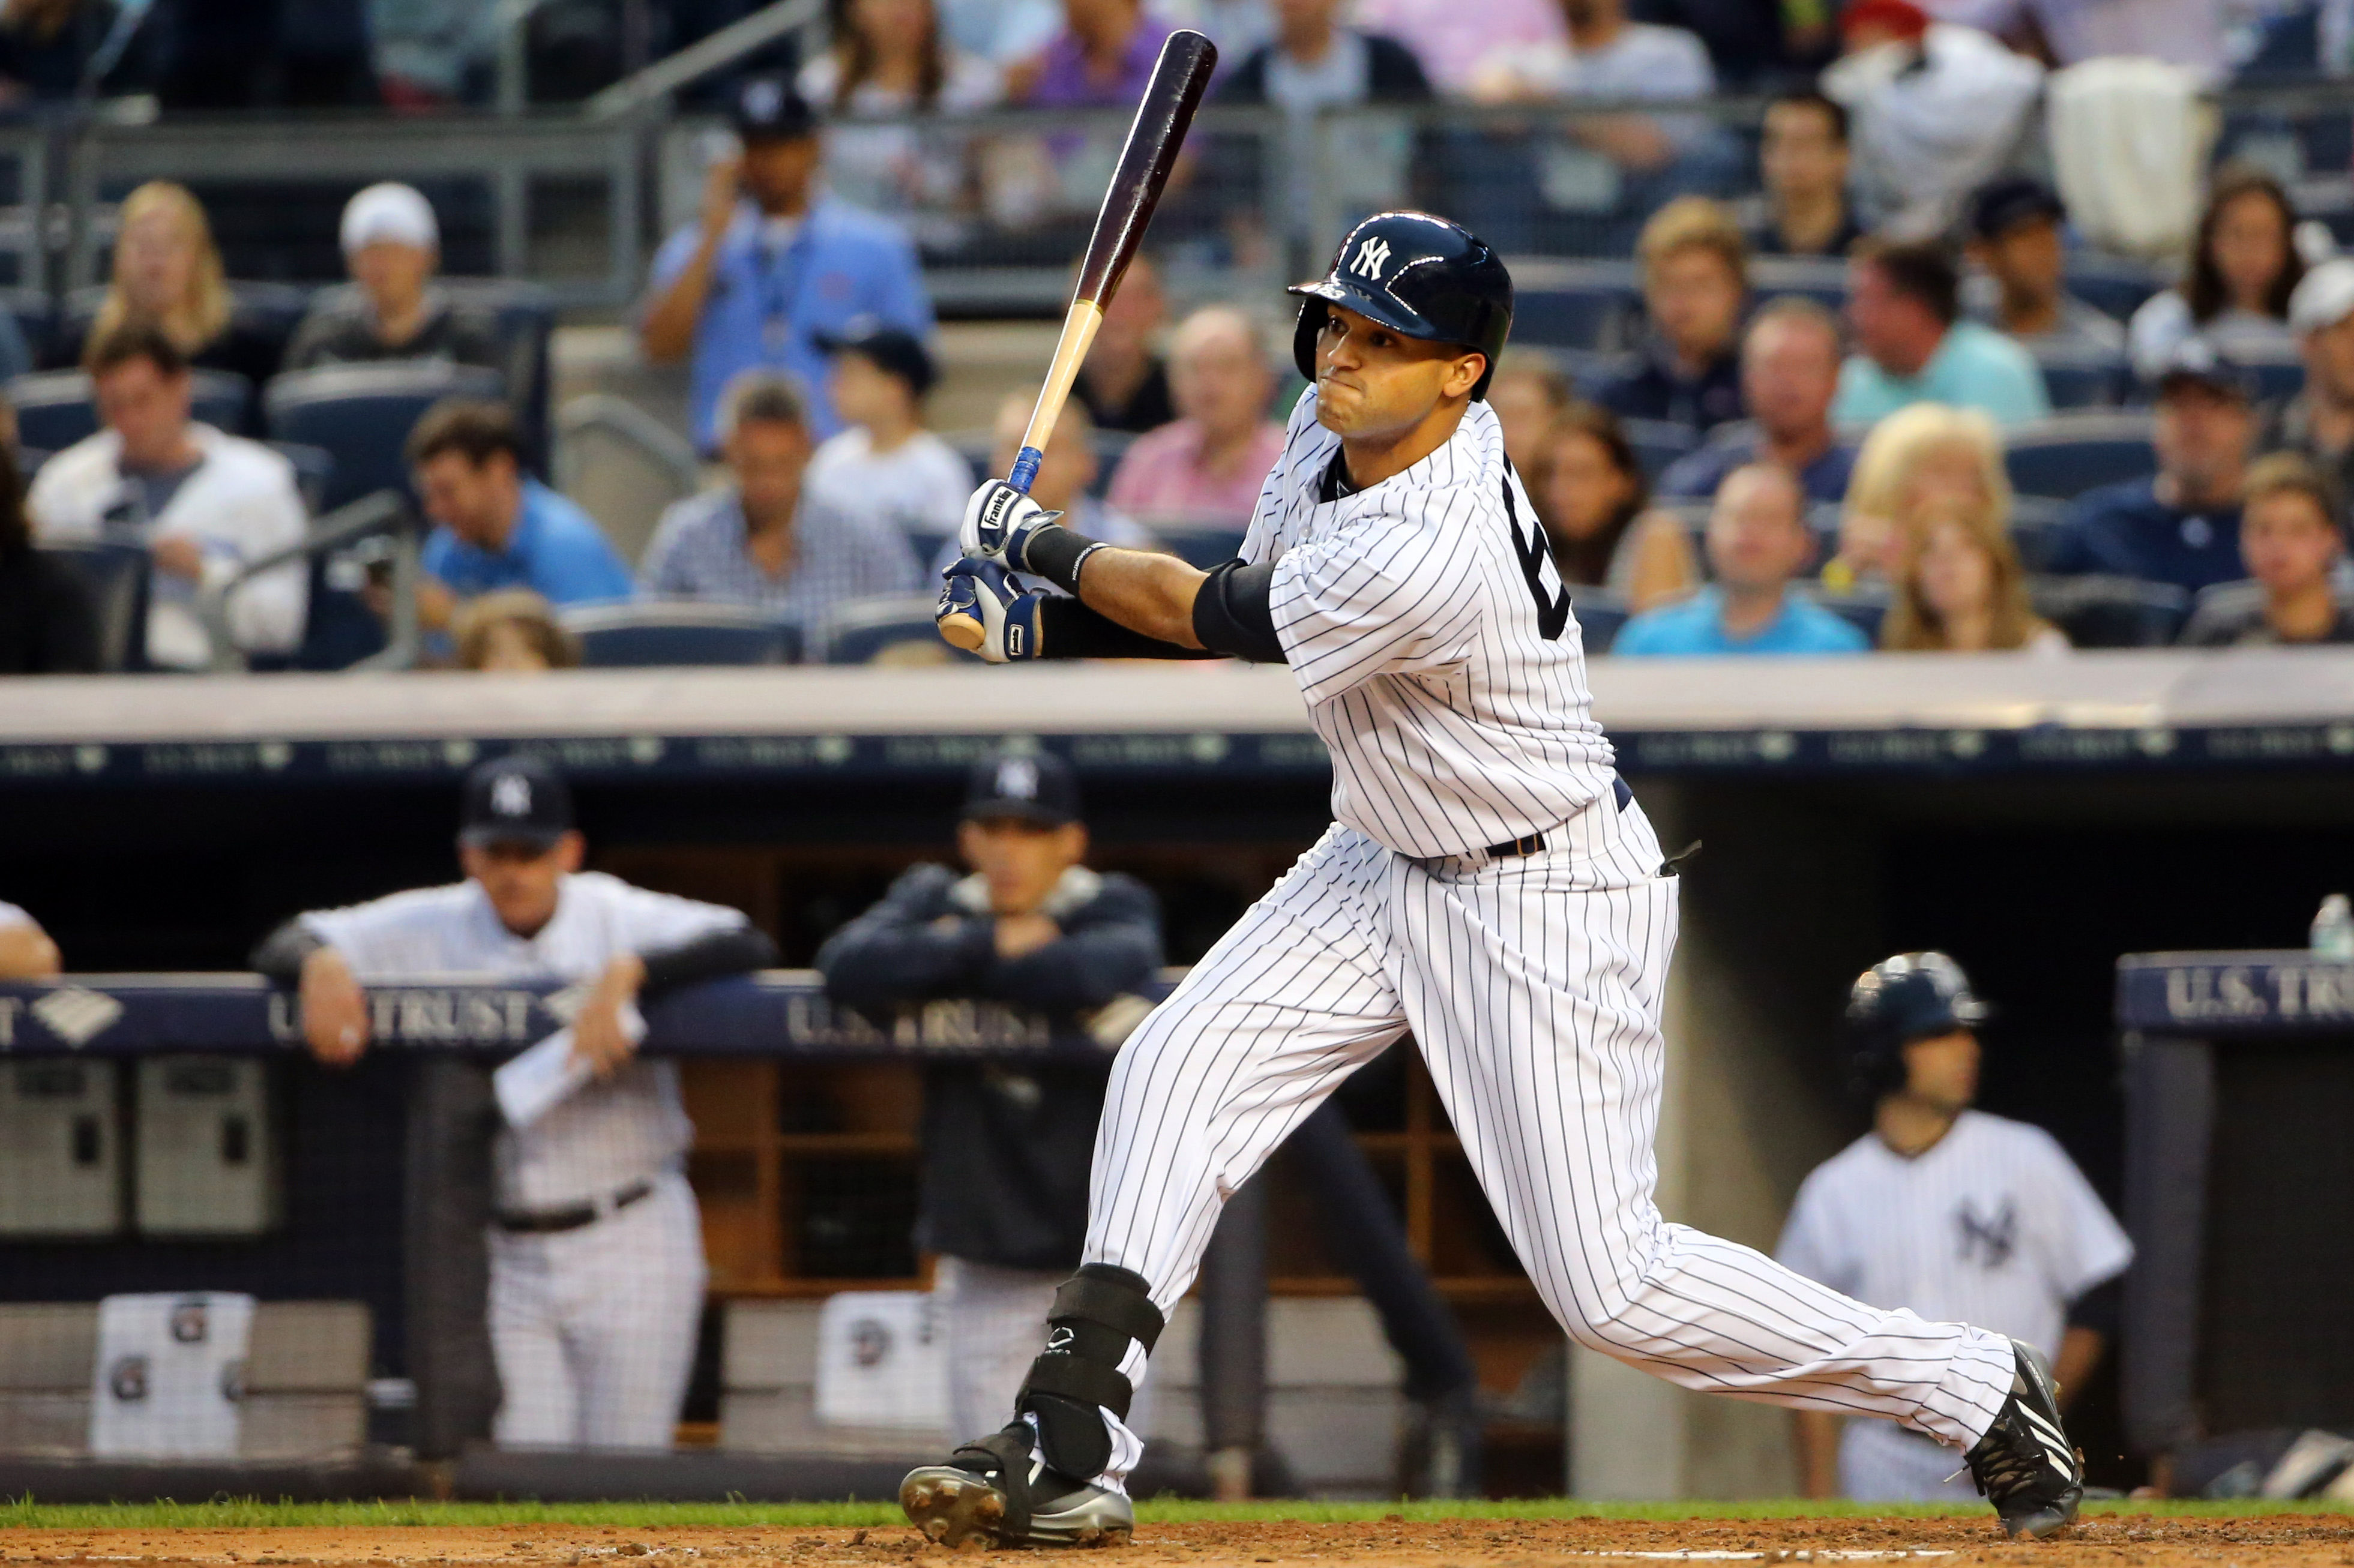 New York Yankees: Mason Williams Is The Future In The Outfield, Not Aaron Judge 4